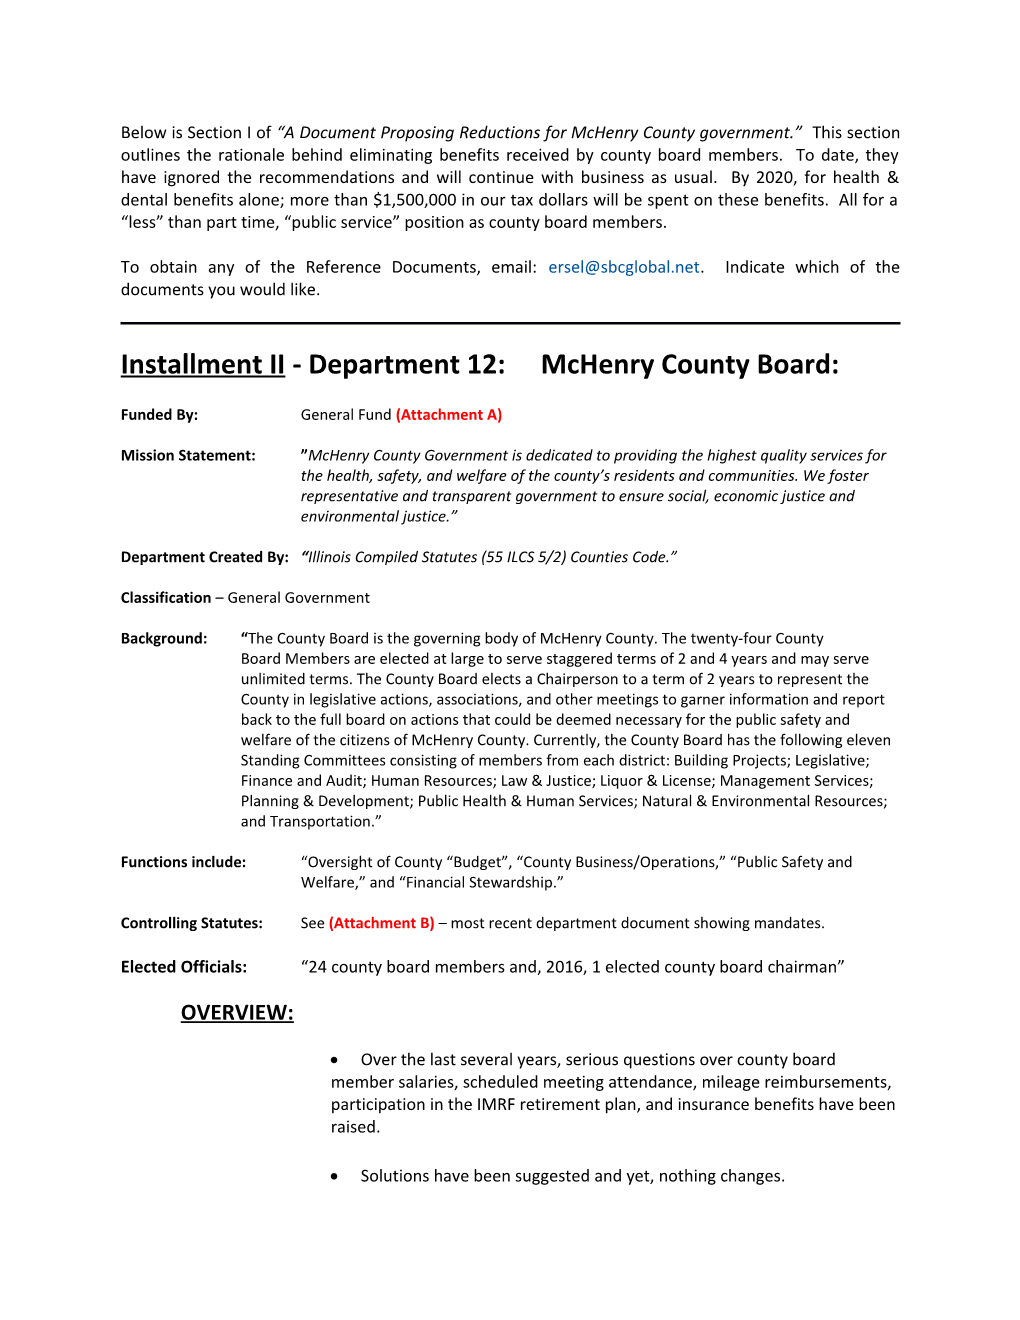 Installment II - Department 12:Mchenry County Board